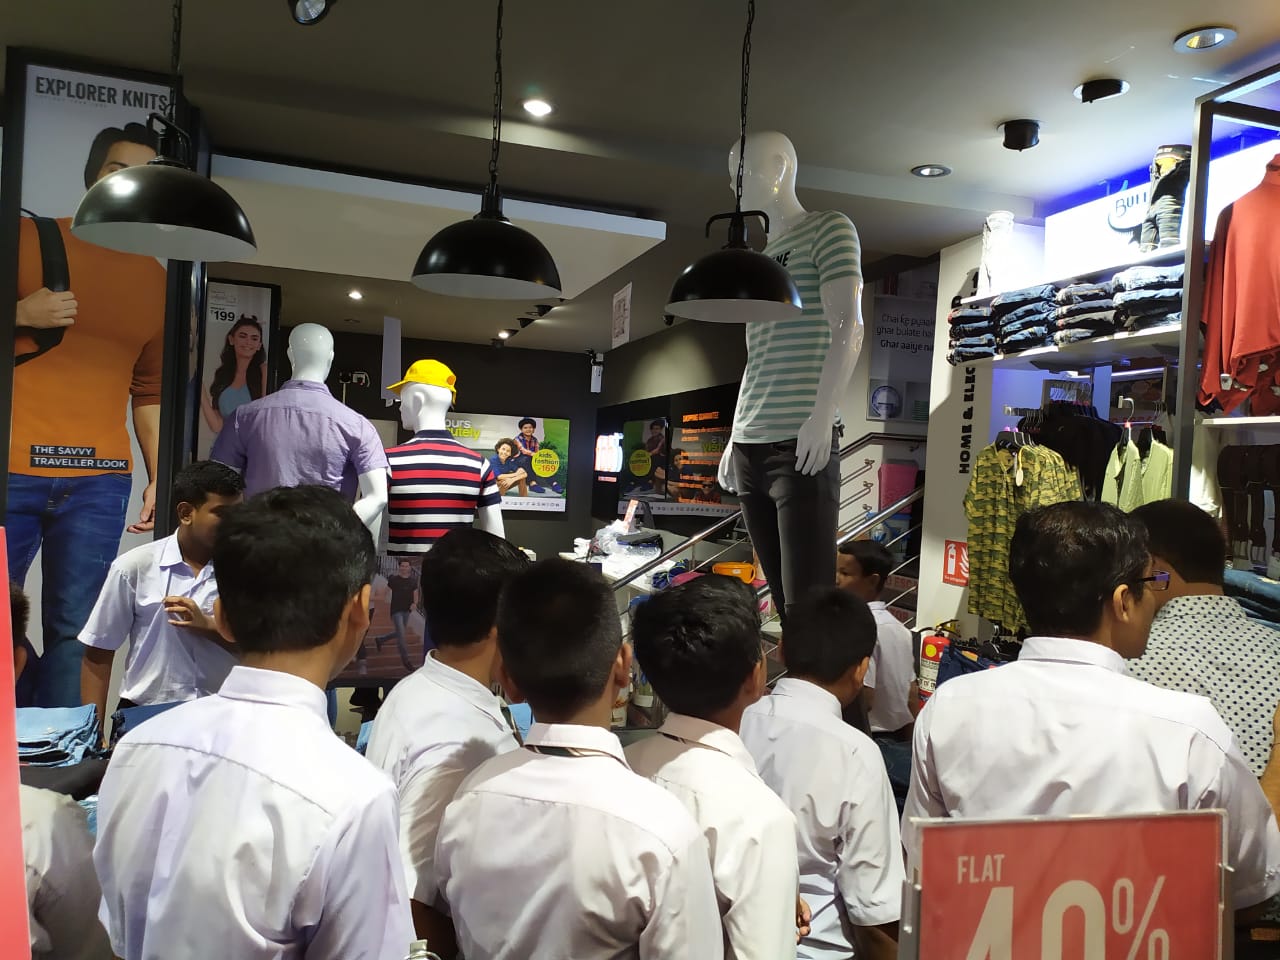 Industry visit session organized in Retail Store